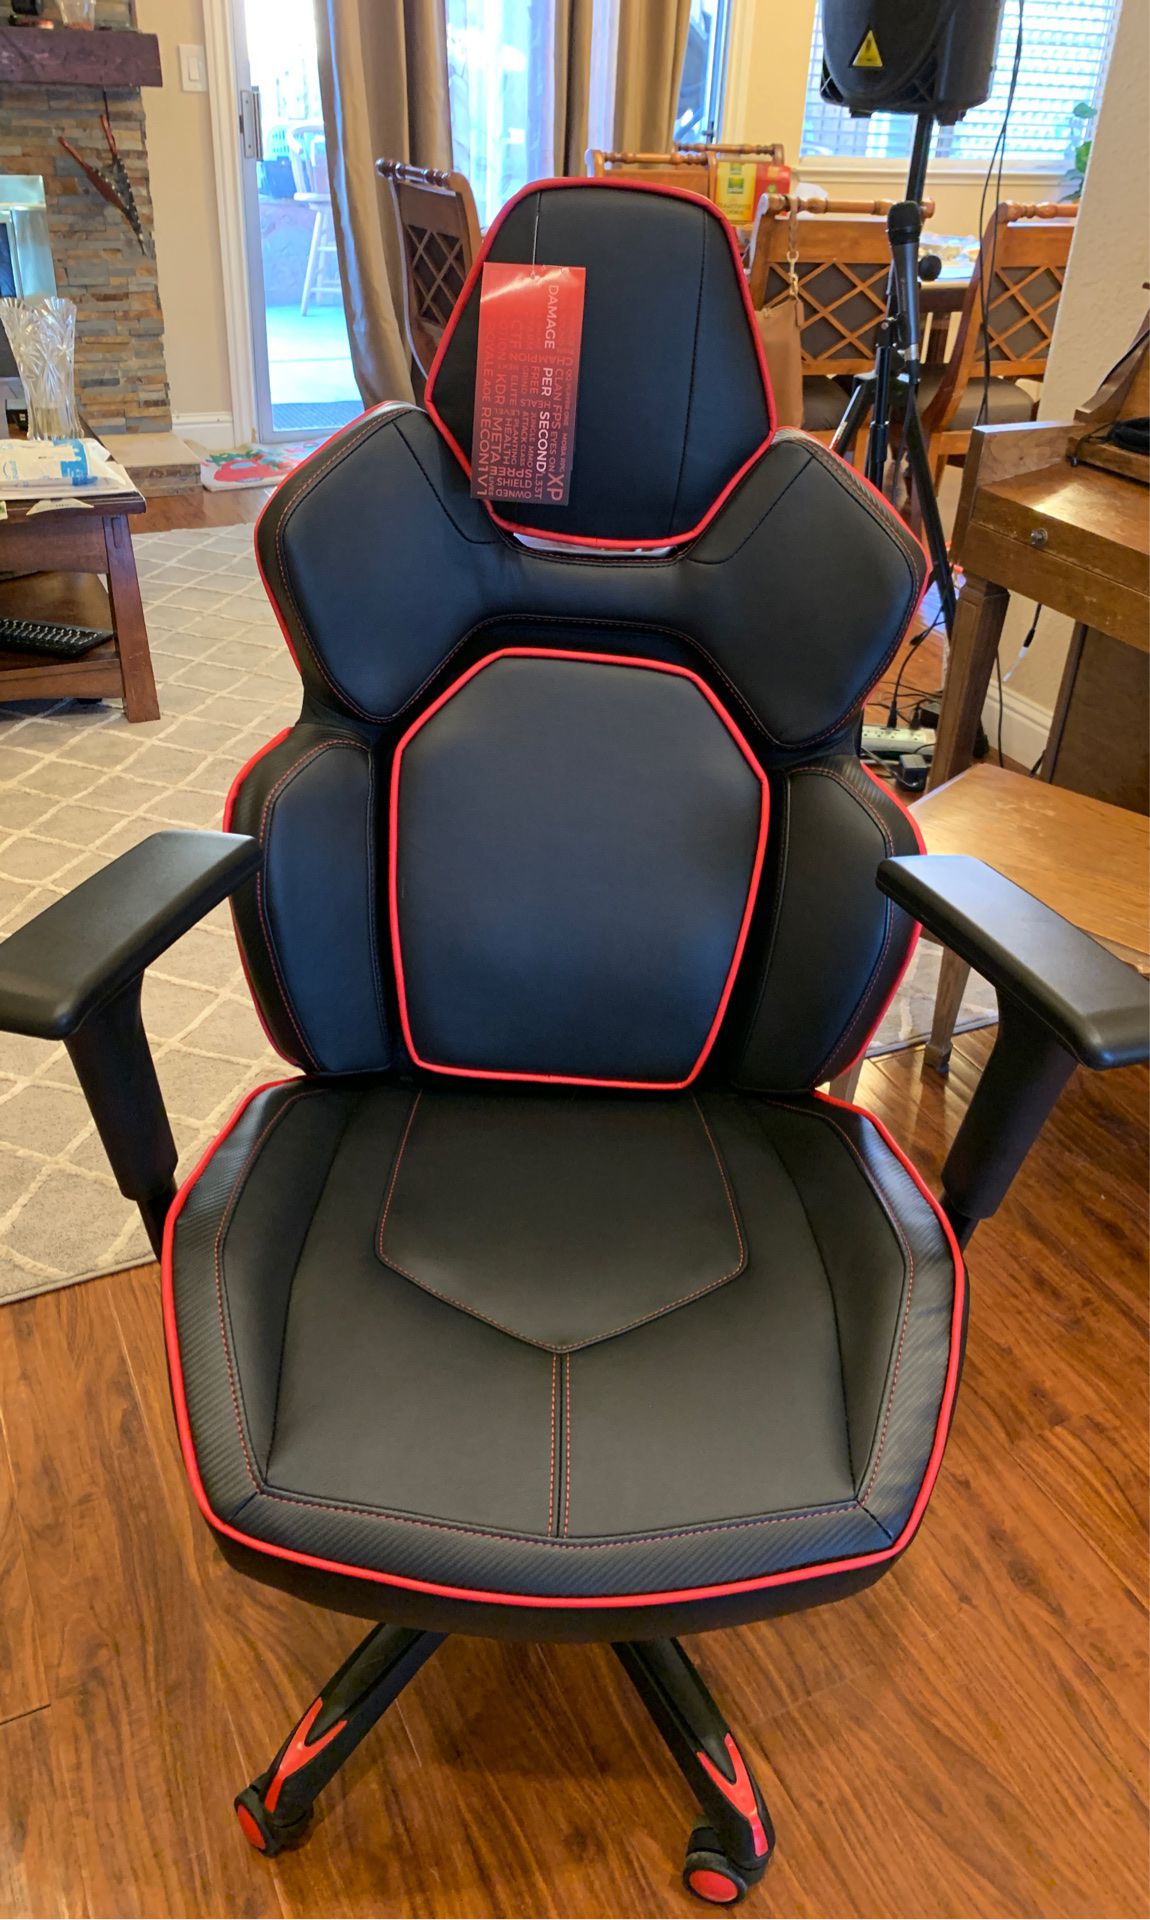 DPS 3D Insight gaming chair